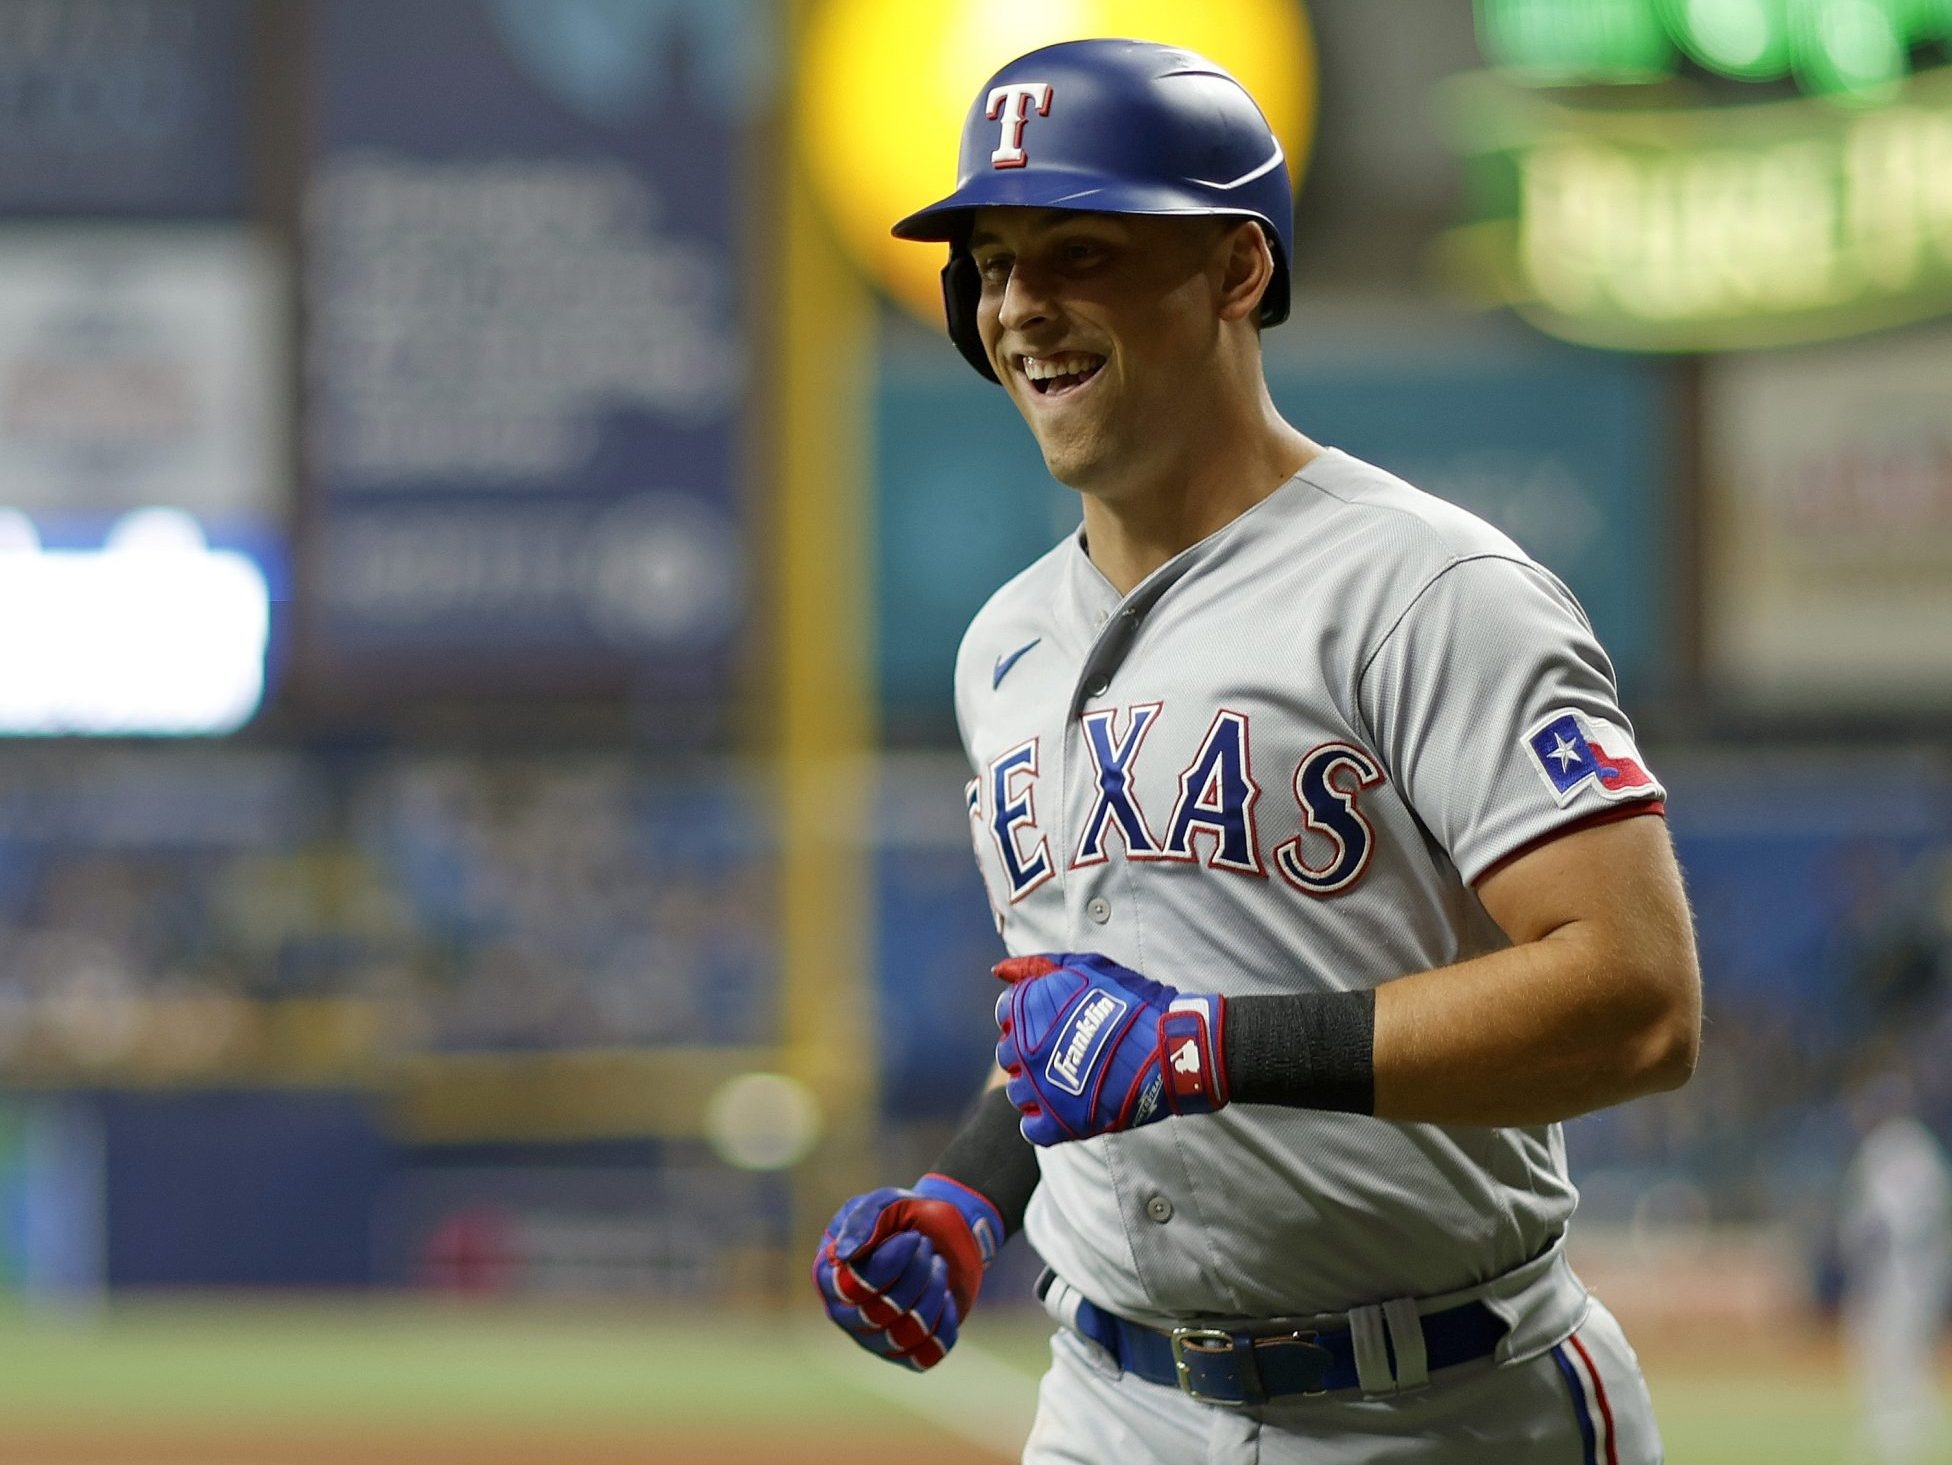 Nathaniel Lowe's home run lifts Rangers, stings Rays